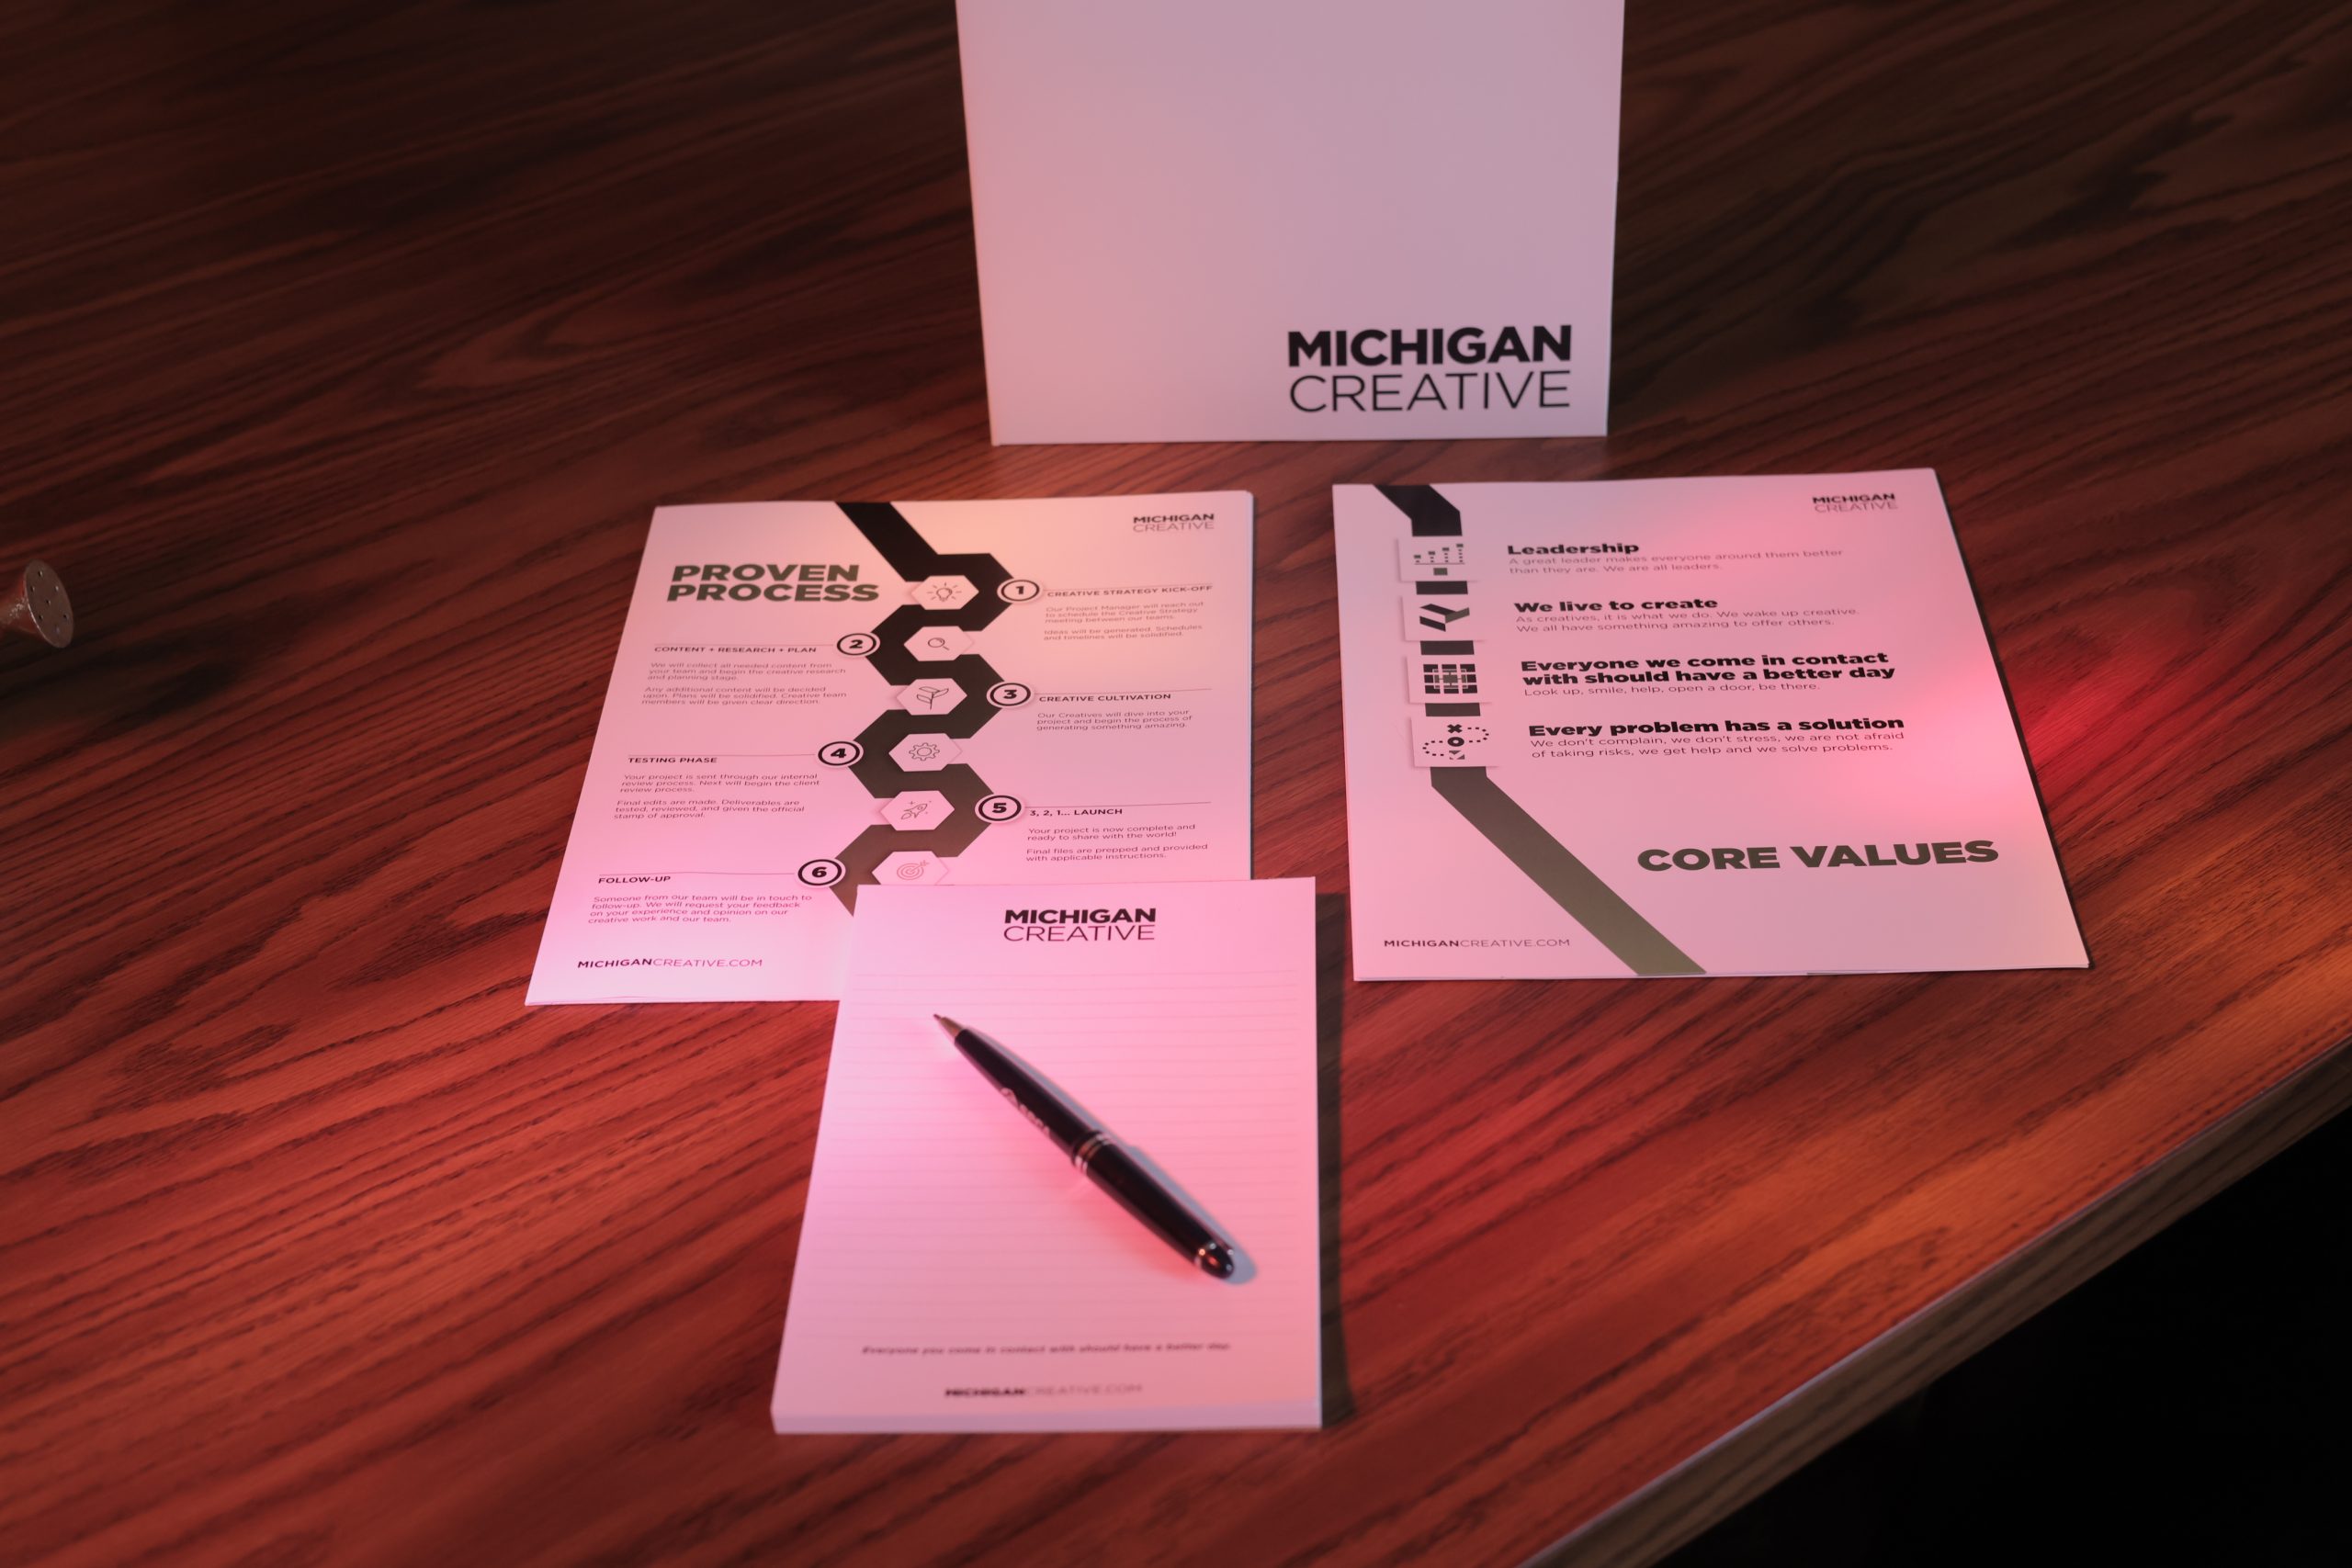 Michigan Creatives Onliness Statement, Core Values, and Mission